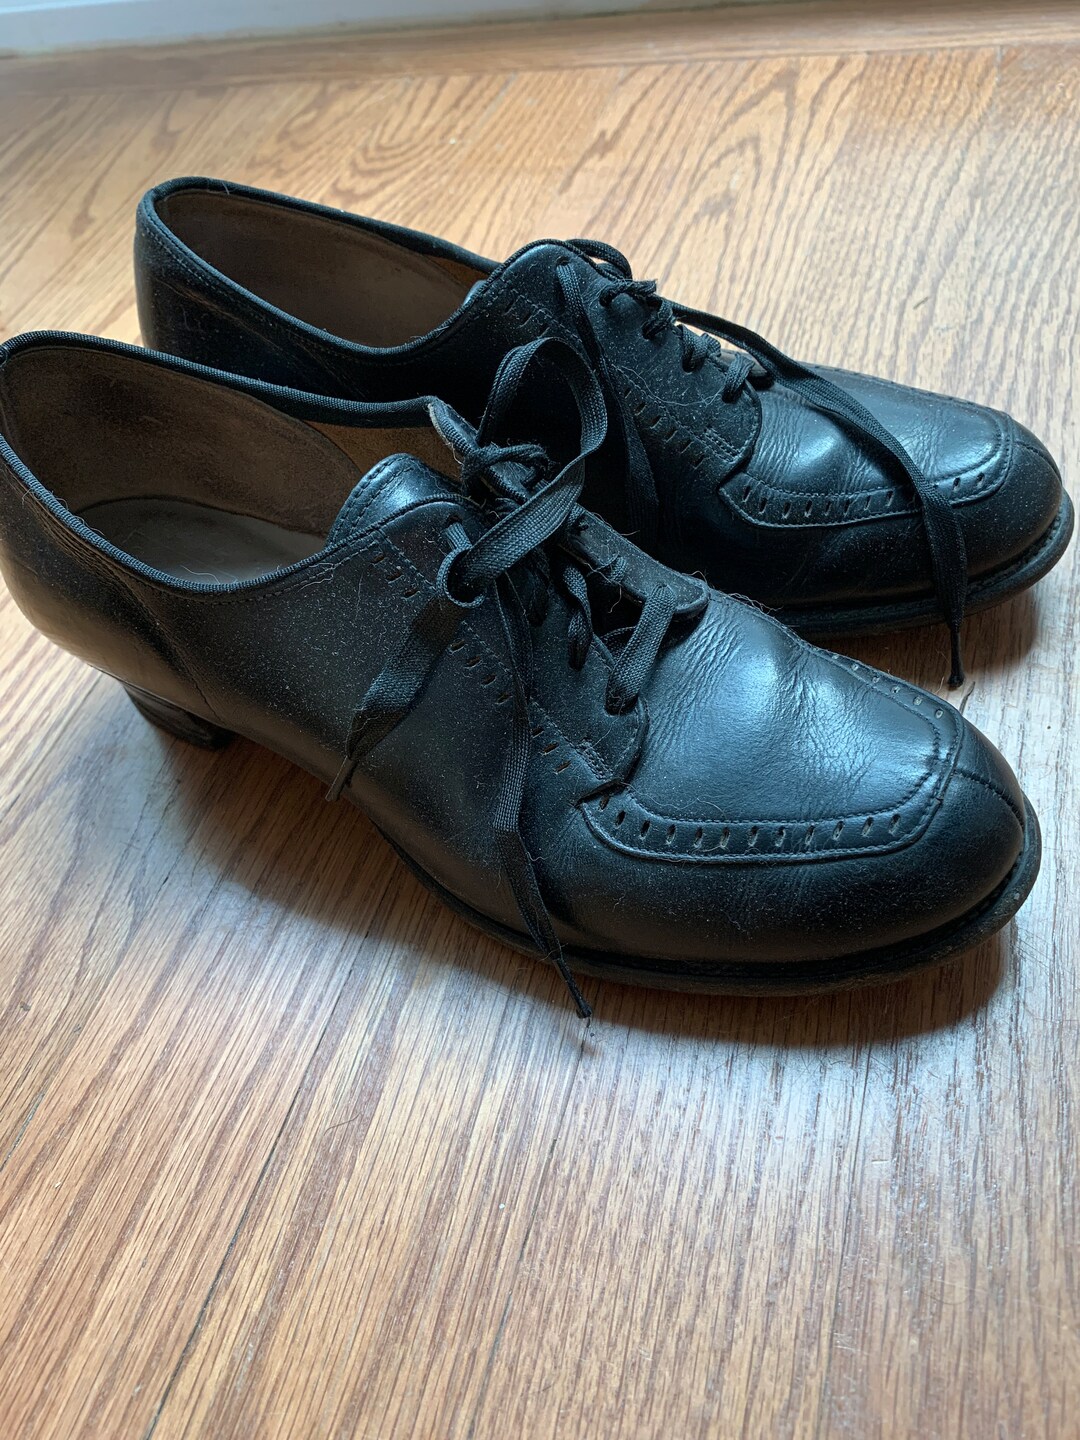 1940's Witch Shoes, Dark Academia, Midwives, Granny Core, Librarian - Etsy